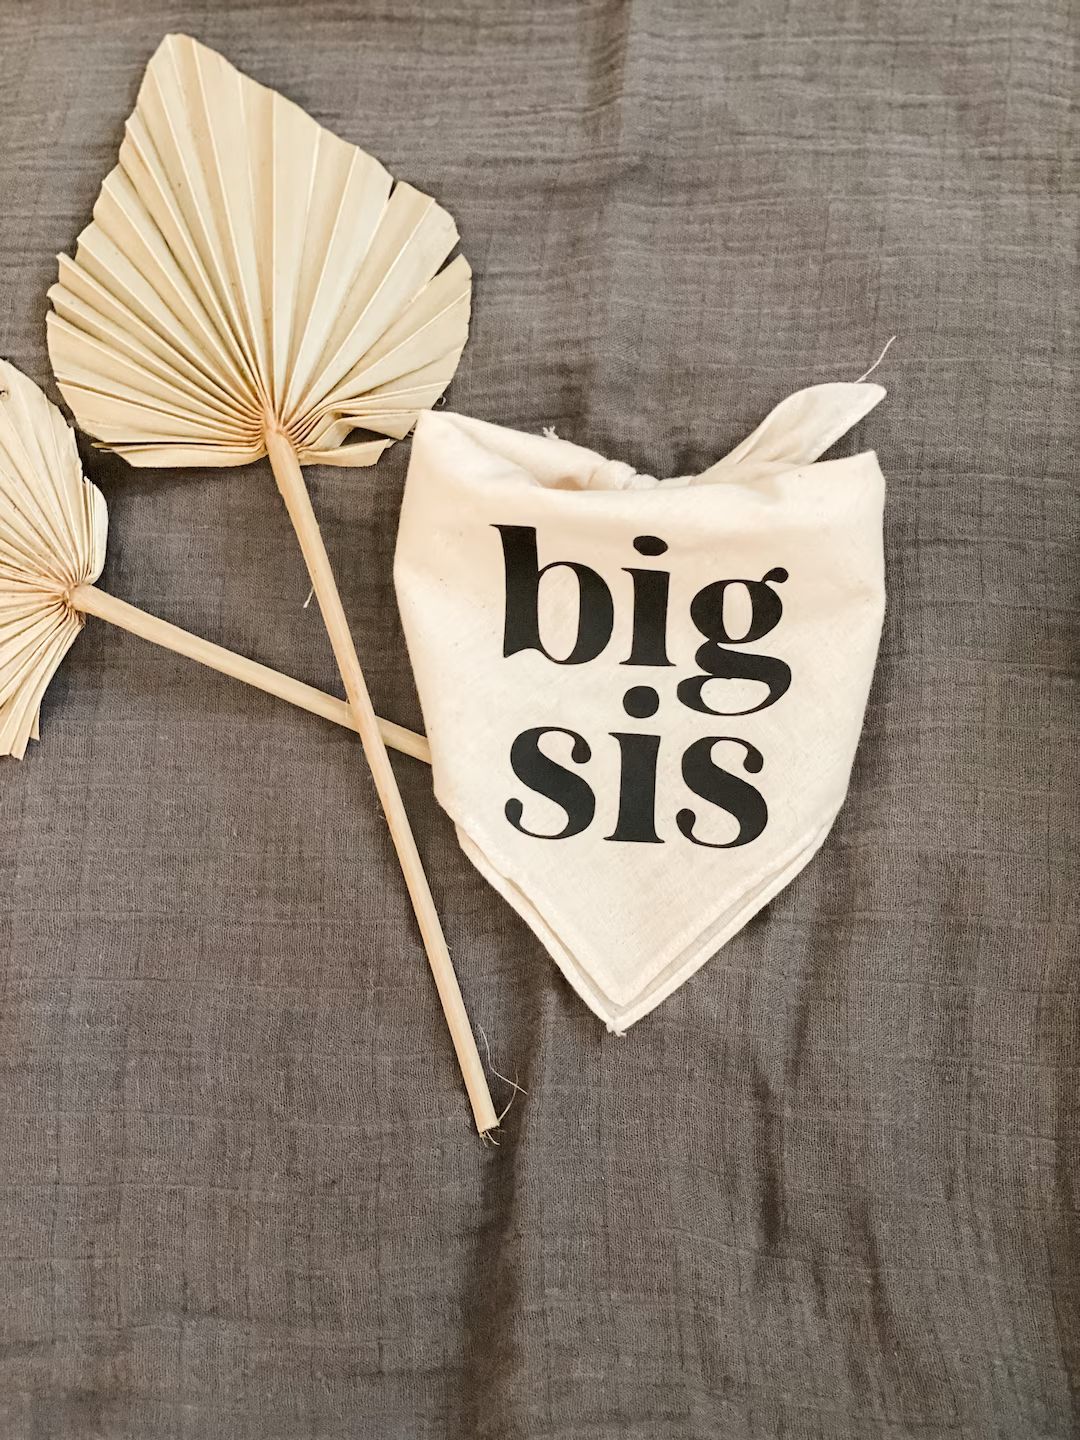 Big Sis or Big Bro Dog Bandana (For baby announcement, birth announcement, maternity photoshoot) | Etsy (US)